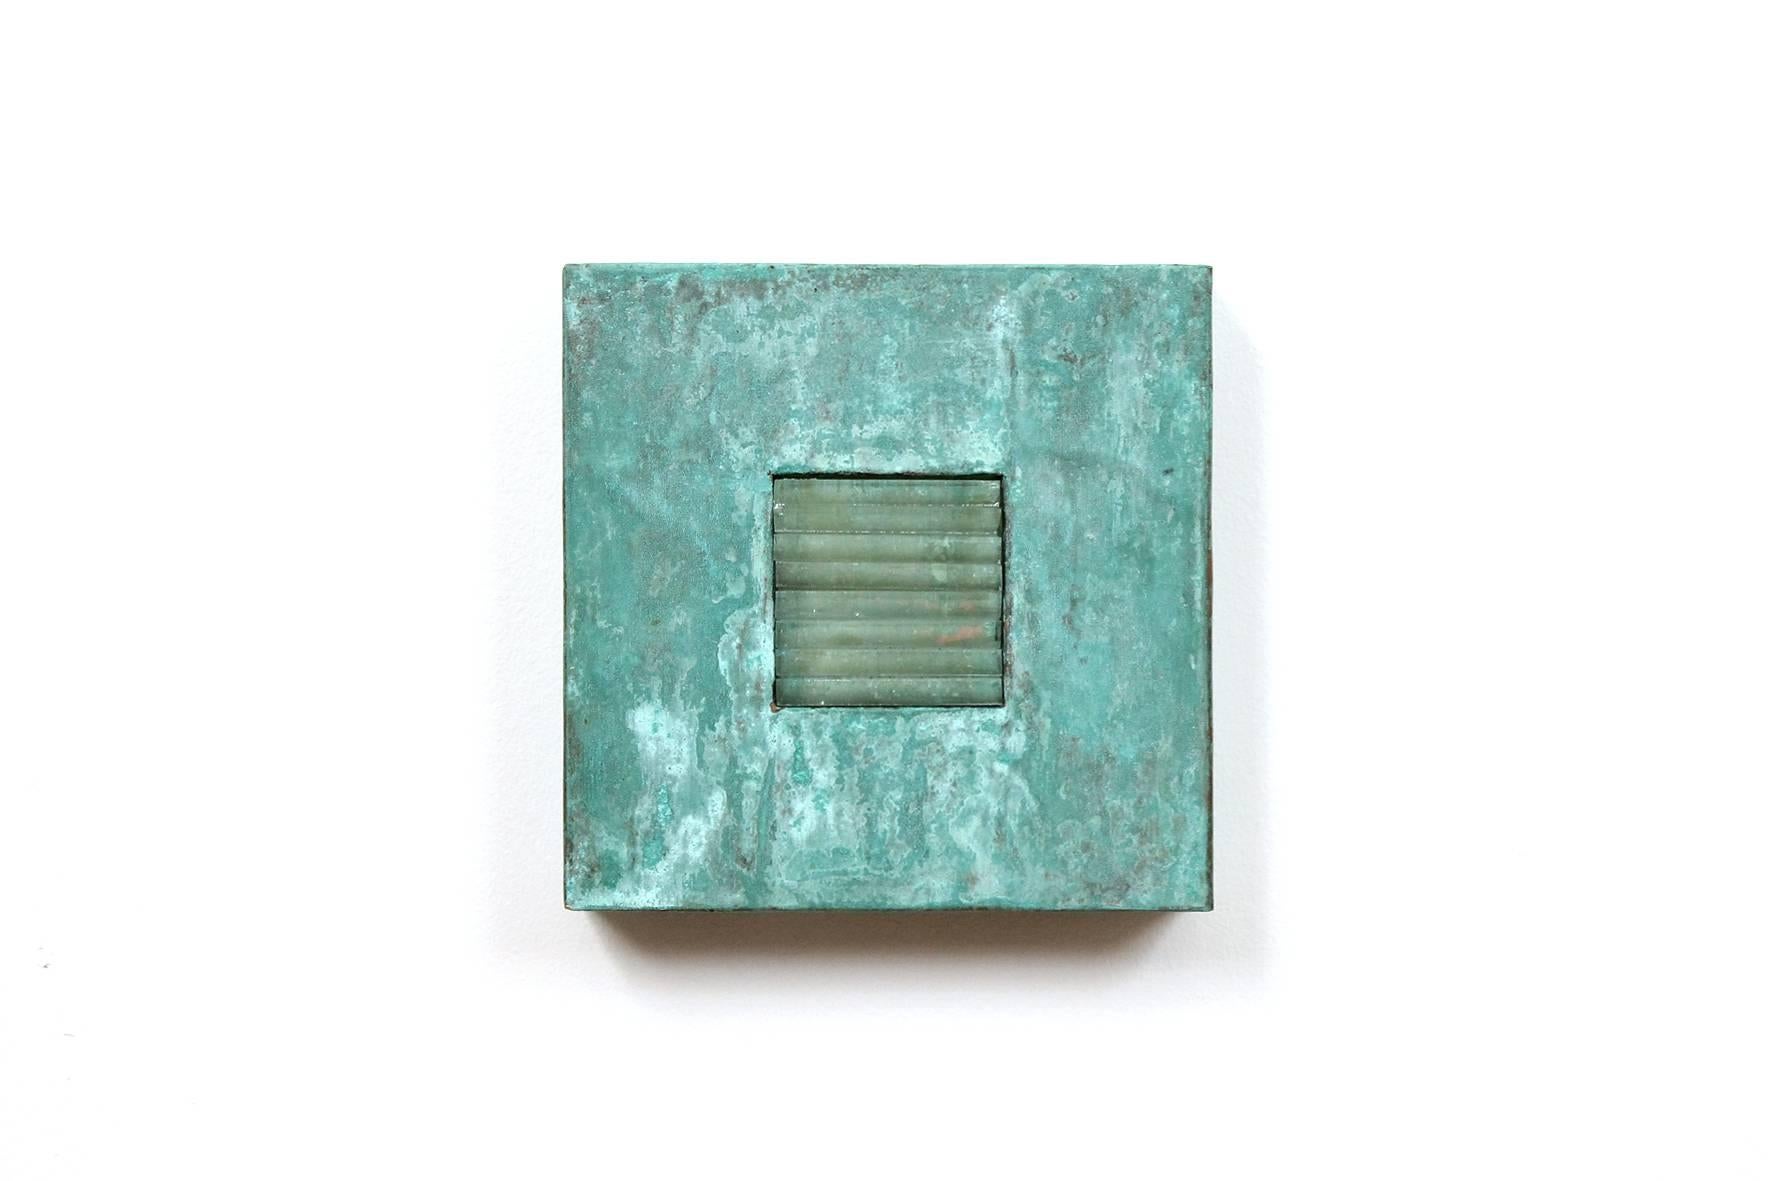 Two works: Inner green and glass patina by listed Argentinian artist Susana Jaime-Mena. Both signed Susana Jaime-Mena and dated 2000. Nohra Haime Gallery labels to the reverse of both. Inner Green consists of copper on cardboard, beeswax with copper